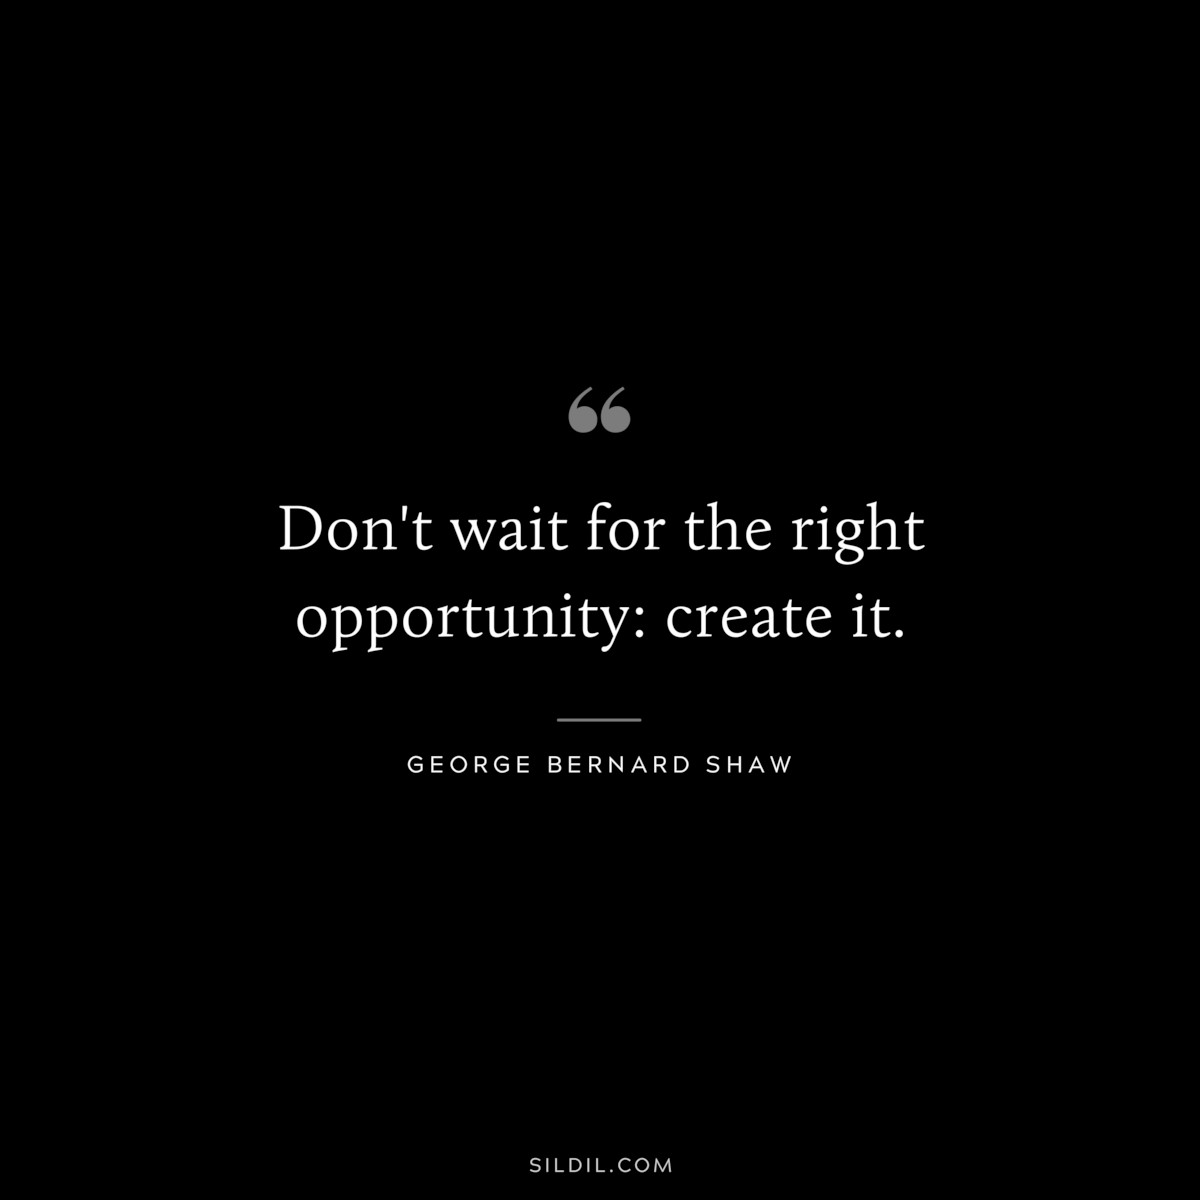 Don't wait for the right opportunity: create it. ― George Bernard Shaw